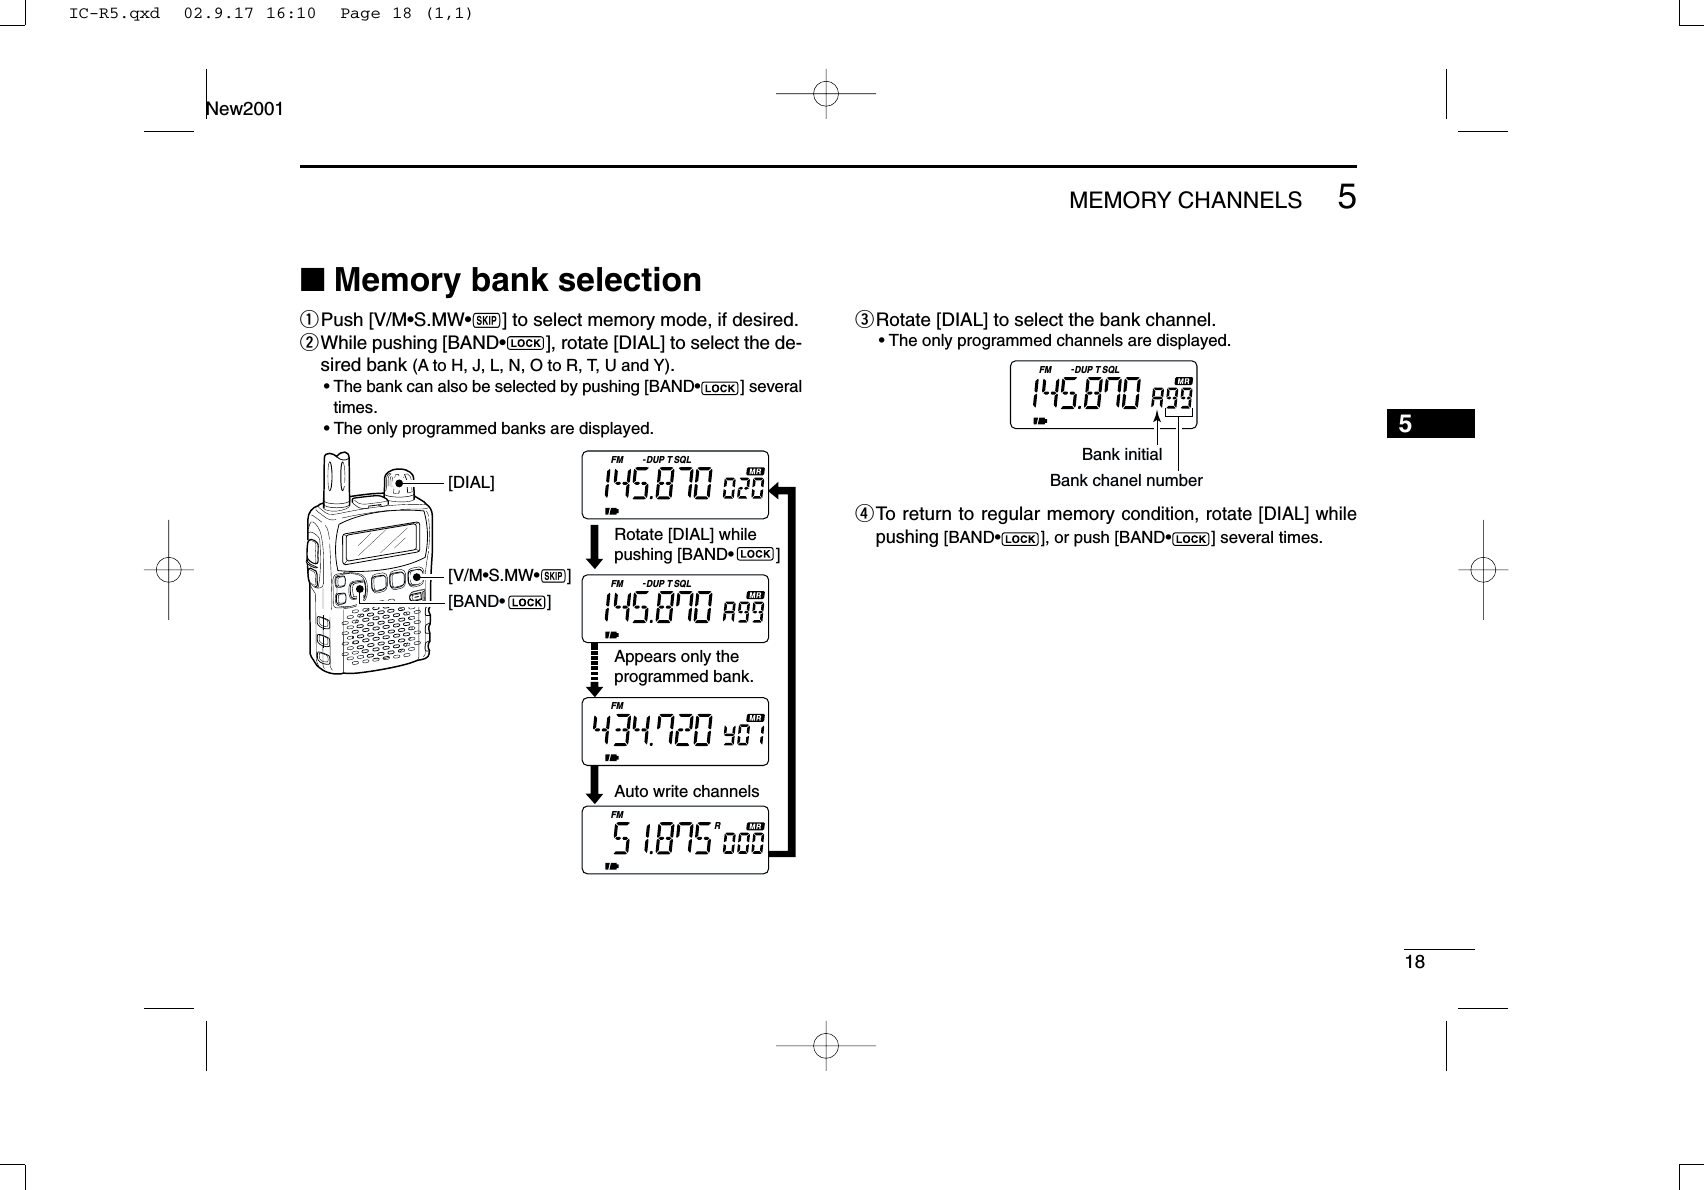 185MEMORY CHANNELSNew20015■Memory bank selectionqPush [V/M•S.MW•~] to select memory mode, if desired.wWhile pushing [BAND•], rotate [DIAL] to select the de-sired bank (A to H, J, L, N, O to R, T, U and Y).•The bank can also be selected by pushing [BAND•] severaltimes.•The only programmed banks are displayed.eRotate [DIAL] to select the bank channel.•The only programmed channels are displayed.rTo return to regular memory condition, rotate [DIAL] whilepushing [BAND•], or push [BAND•] several times.FM DUP SQLTBank initialBank chanel numberFM DUP SQLTFM DUP SQLTFMFMR[V/M•S.MW•~][DIAL][BAND•         ]Rotate [DIAL] while pushing [BAND•         ]Appears only the programmed bank. Auto write channelsIC-R5.qxd  02.9.17 16:10  Page 18 (1,1)